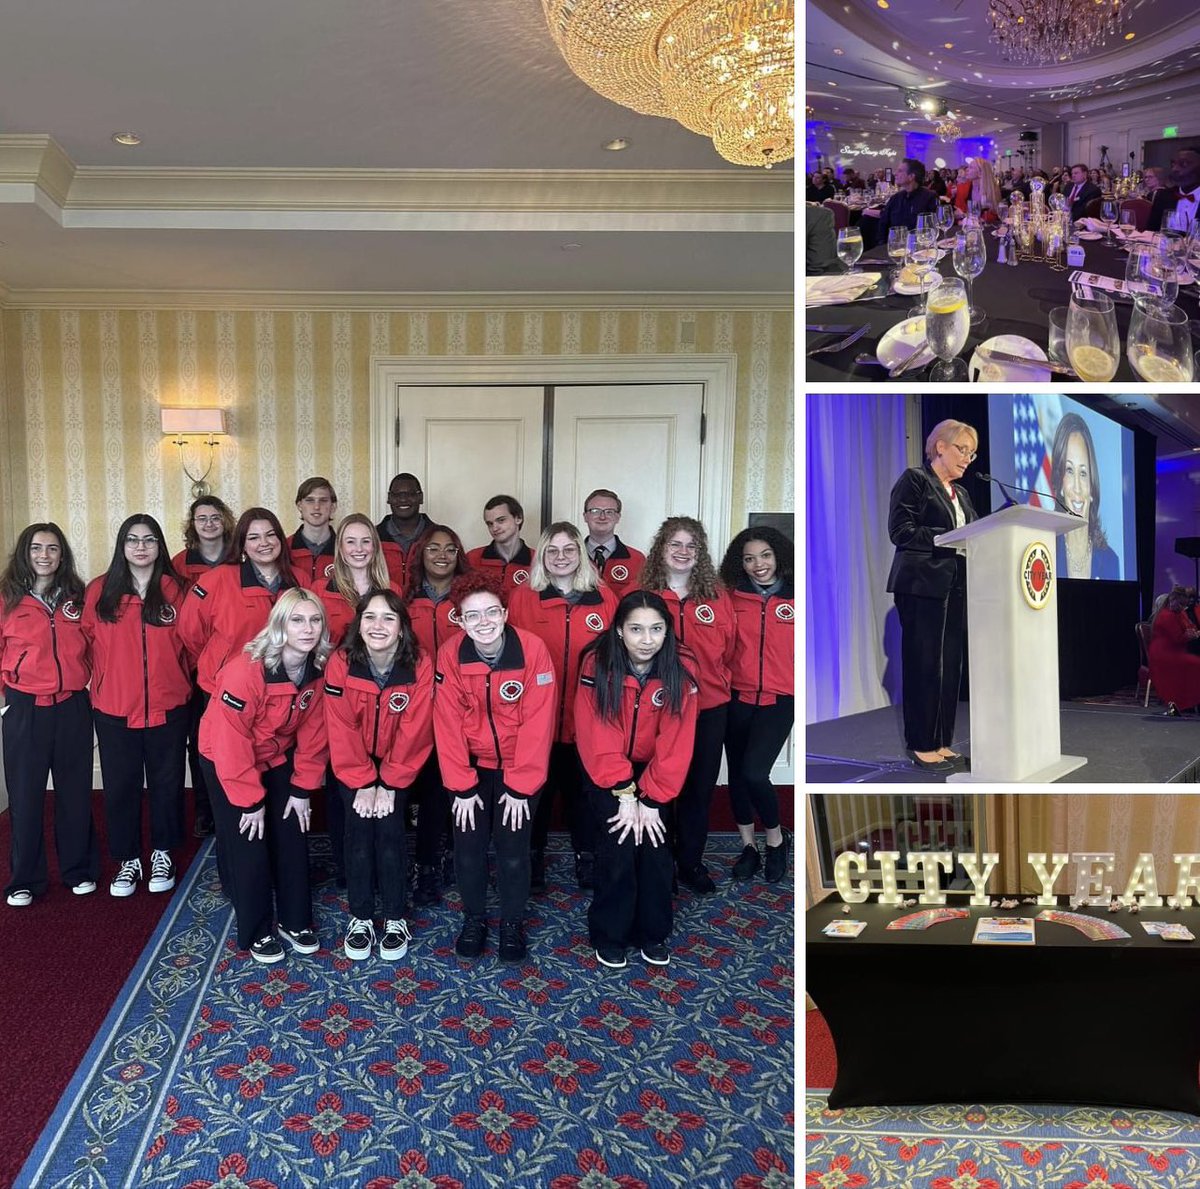 What a Starry Starry Night it was, indeed! A huge thank you to all who came out to celebrate Service, @AmeriCorps, & @CityYearNH on Sat, as well as to @CityYear NH’s incredible Pawn Nitichan, @SenatorHassan, @RepChrisPappas, & our generous sponsors. #Service #CityYear #AmeriCorps